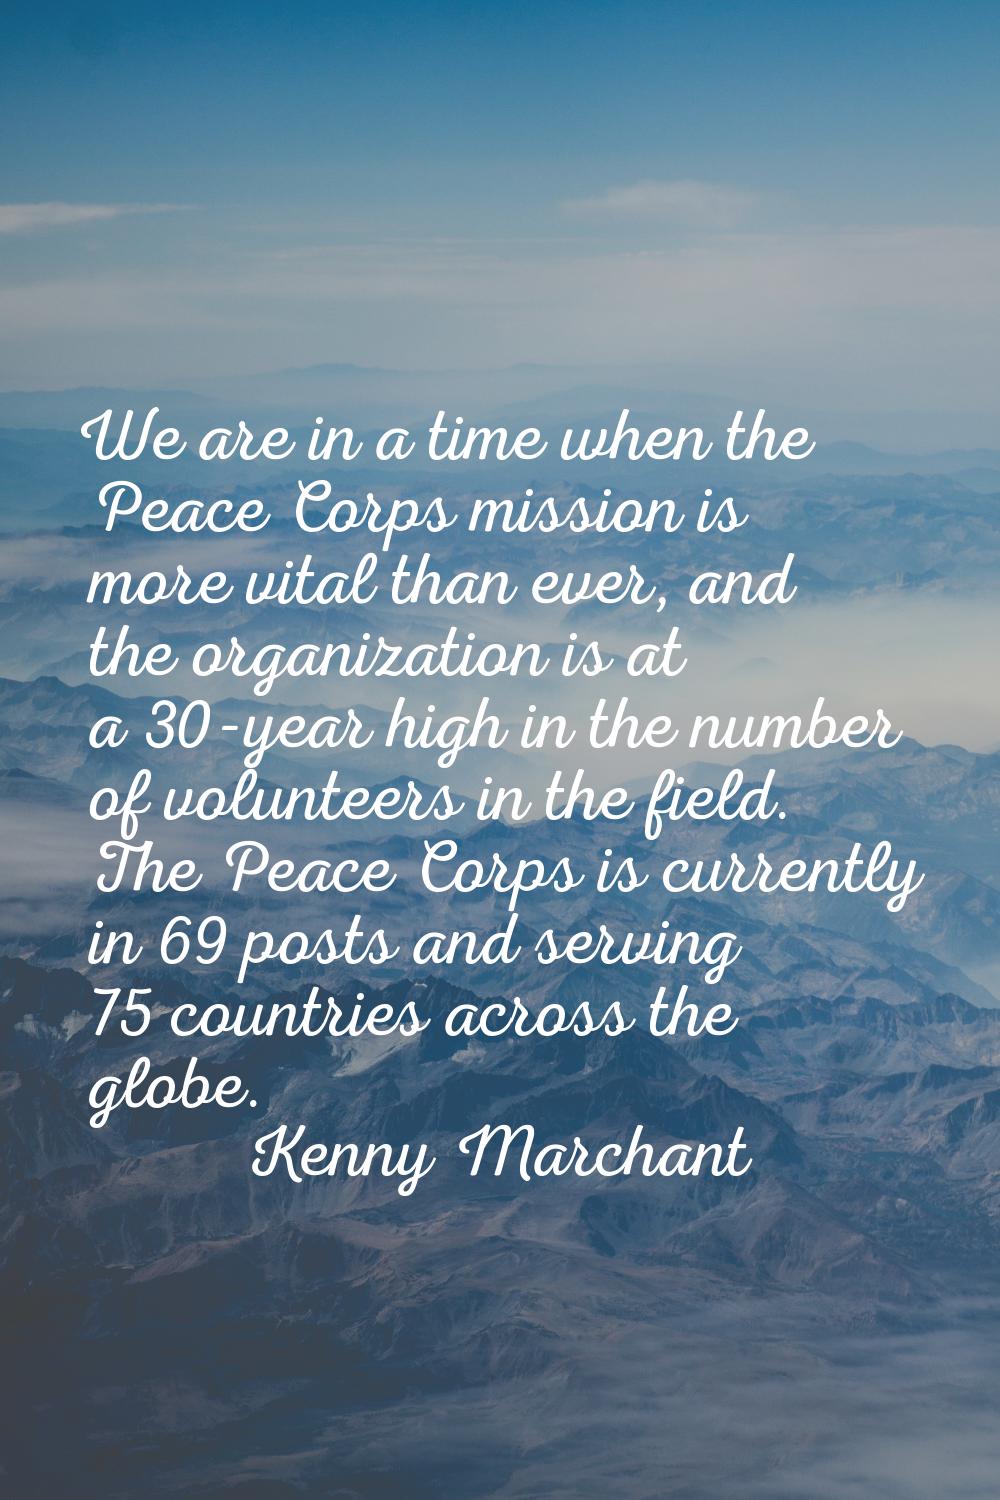 We are in a time when the Peace Corps mission is more vital than ever, and the organization is at a